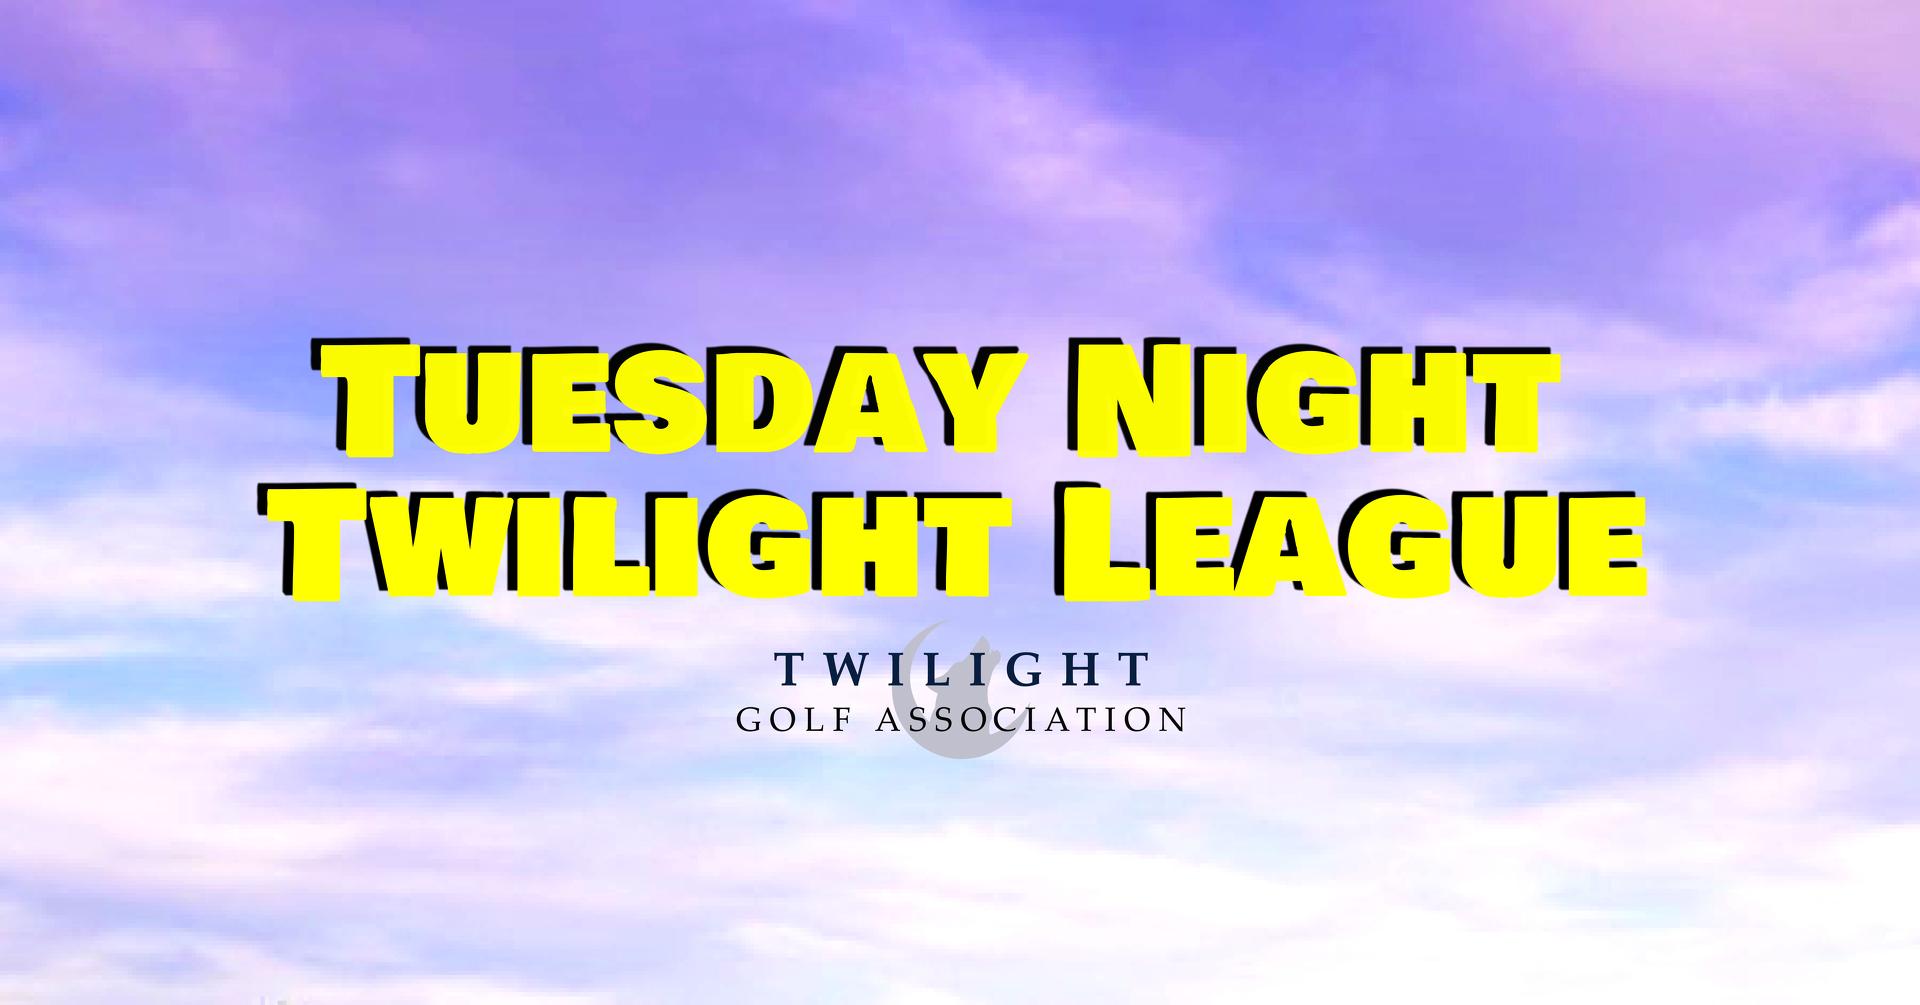 Tuesday Twilight League at 3 Lakes Golf Course